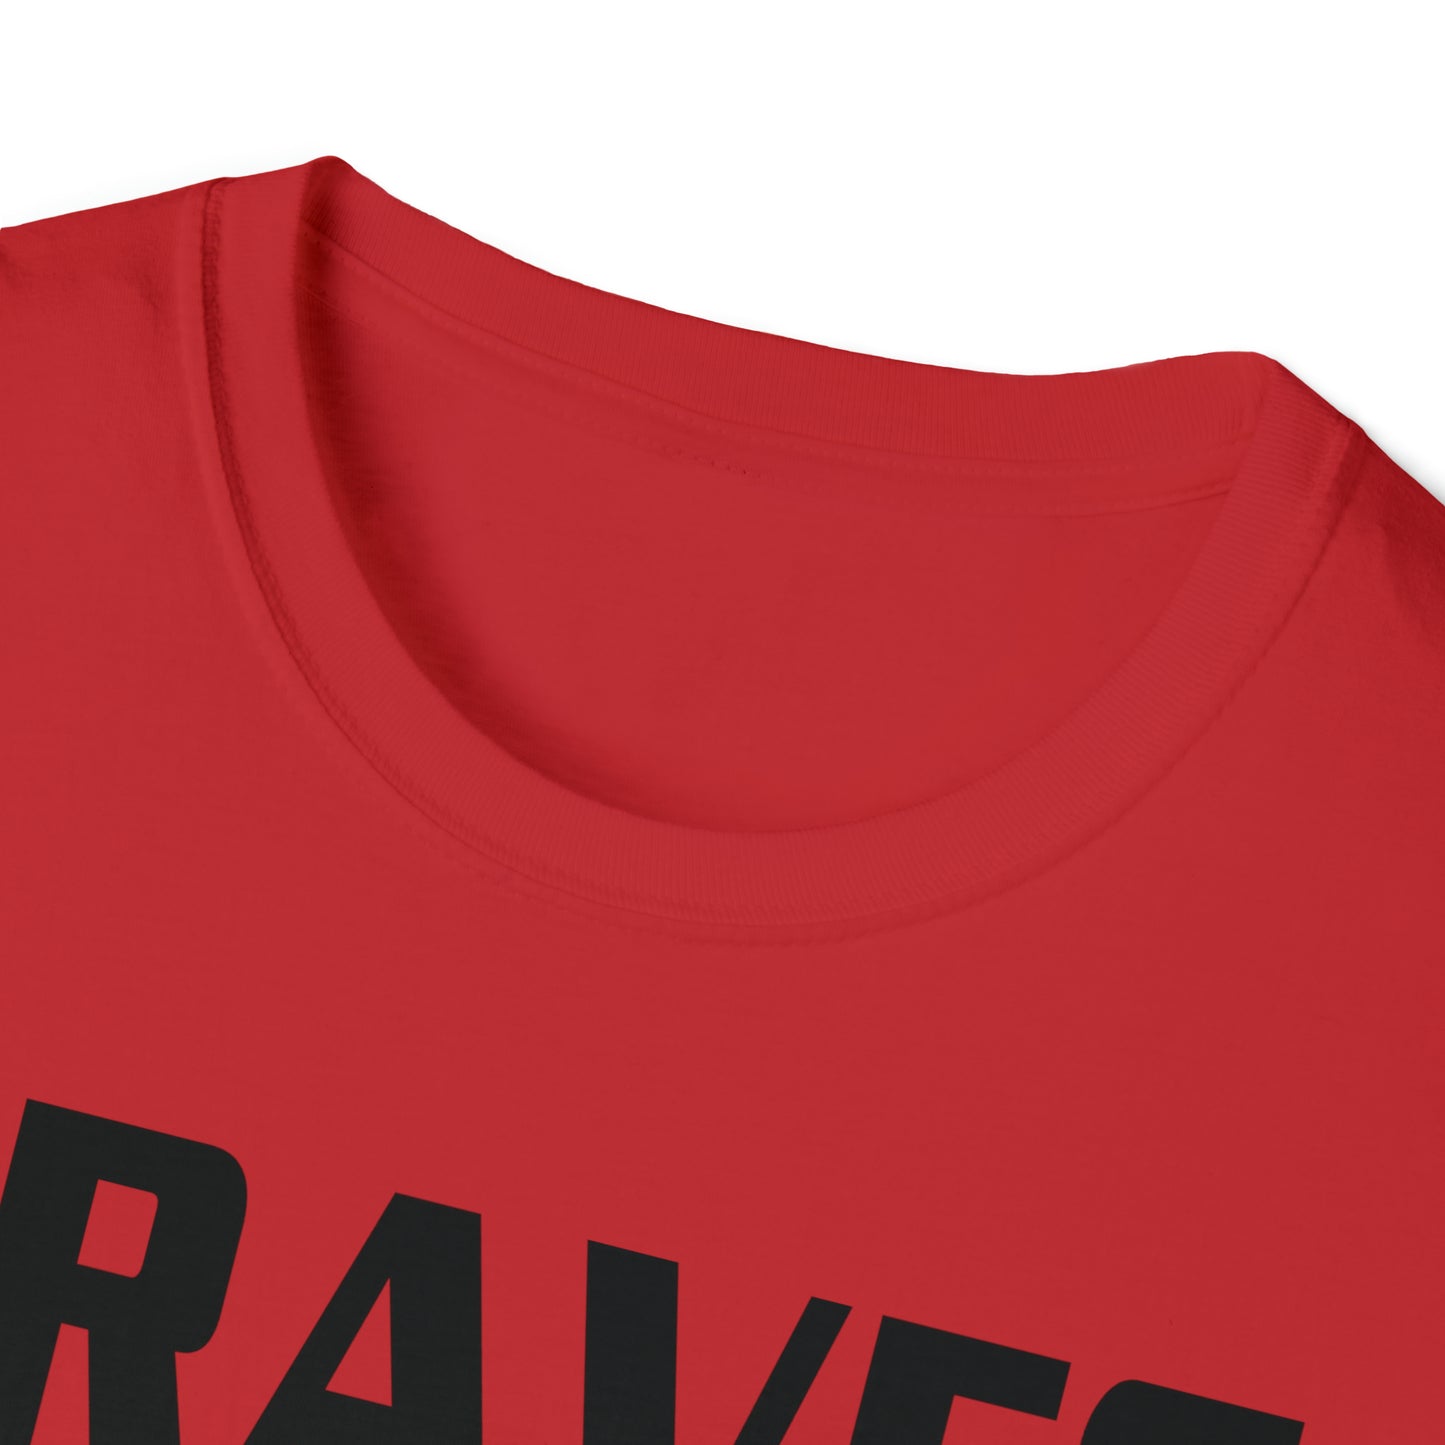 Braves Repeat Unisex Softstyle T-Shirt